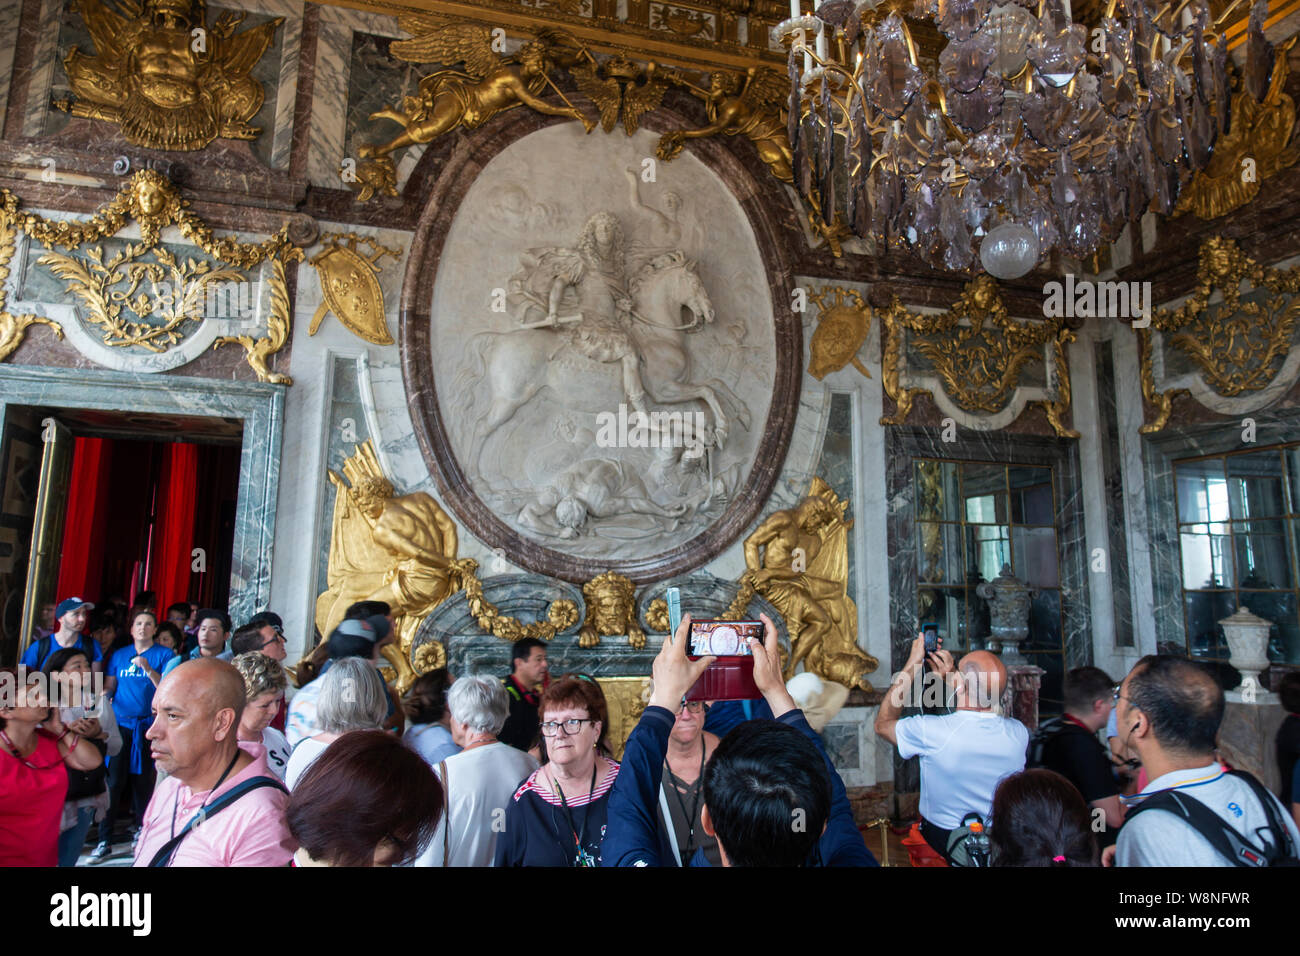 Crowds of tourists within the War Drawing Room in the King’s State Apartment - Palace of Versailles, Yvelines, Île-de-France region of France Stock Photo